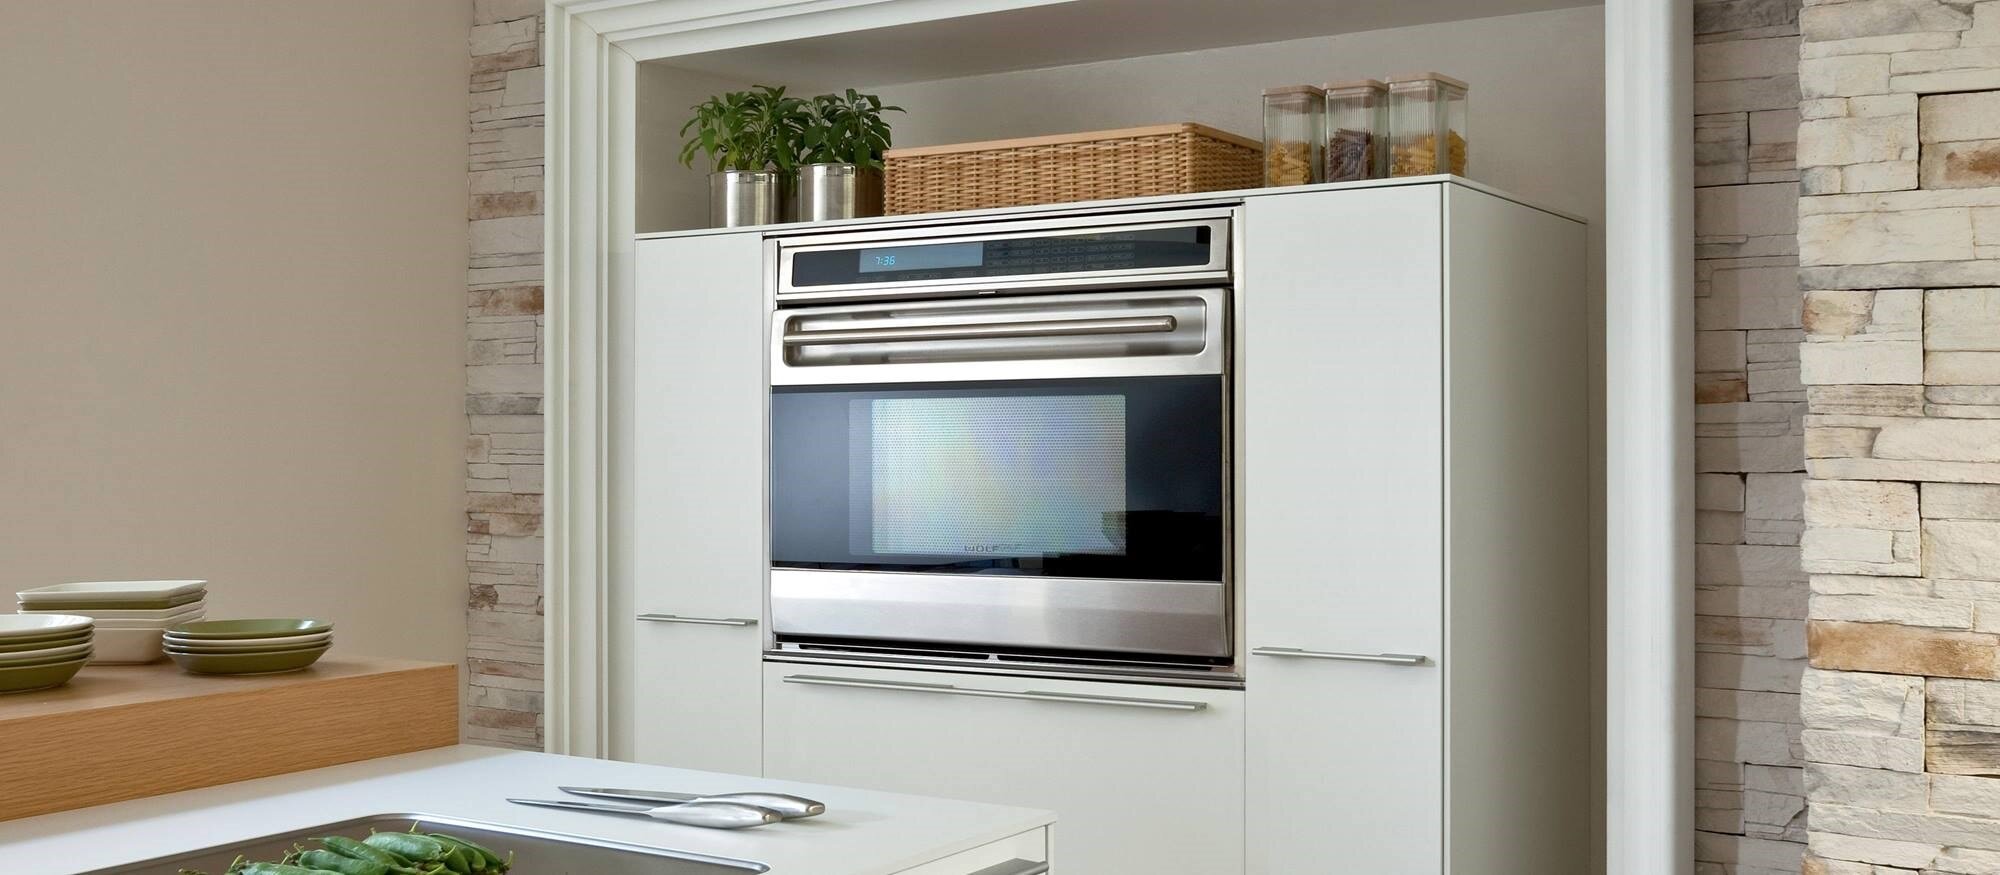 36" Built-In L Series Oven